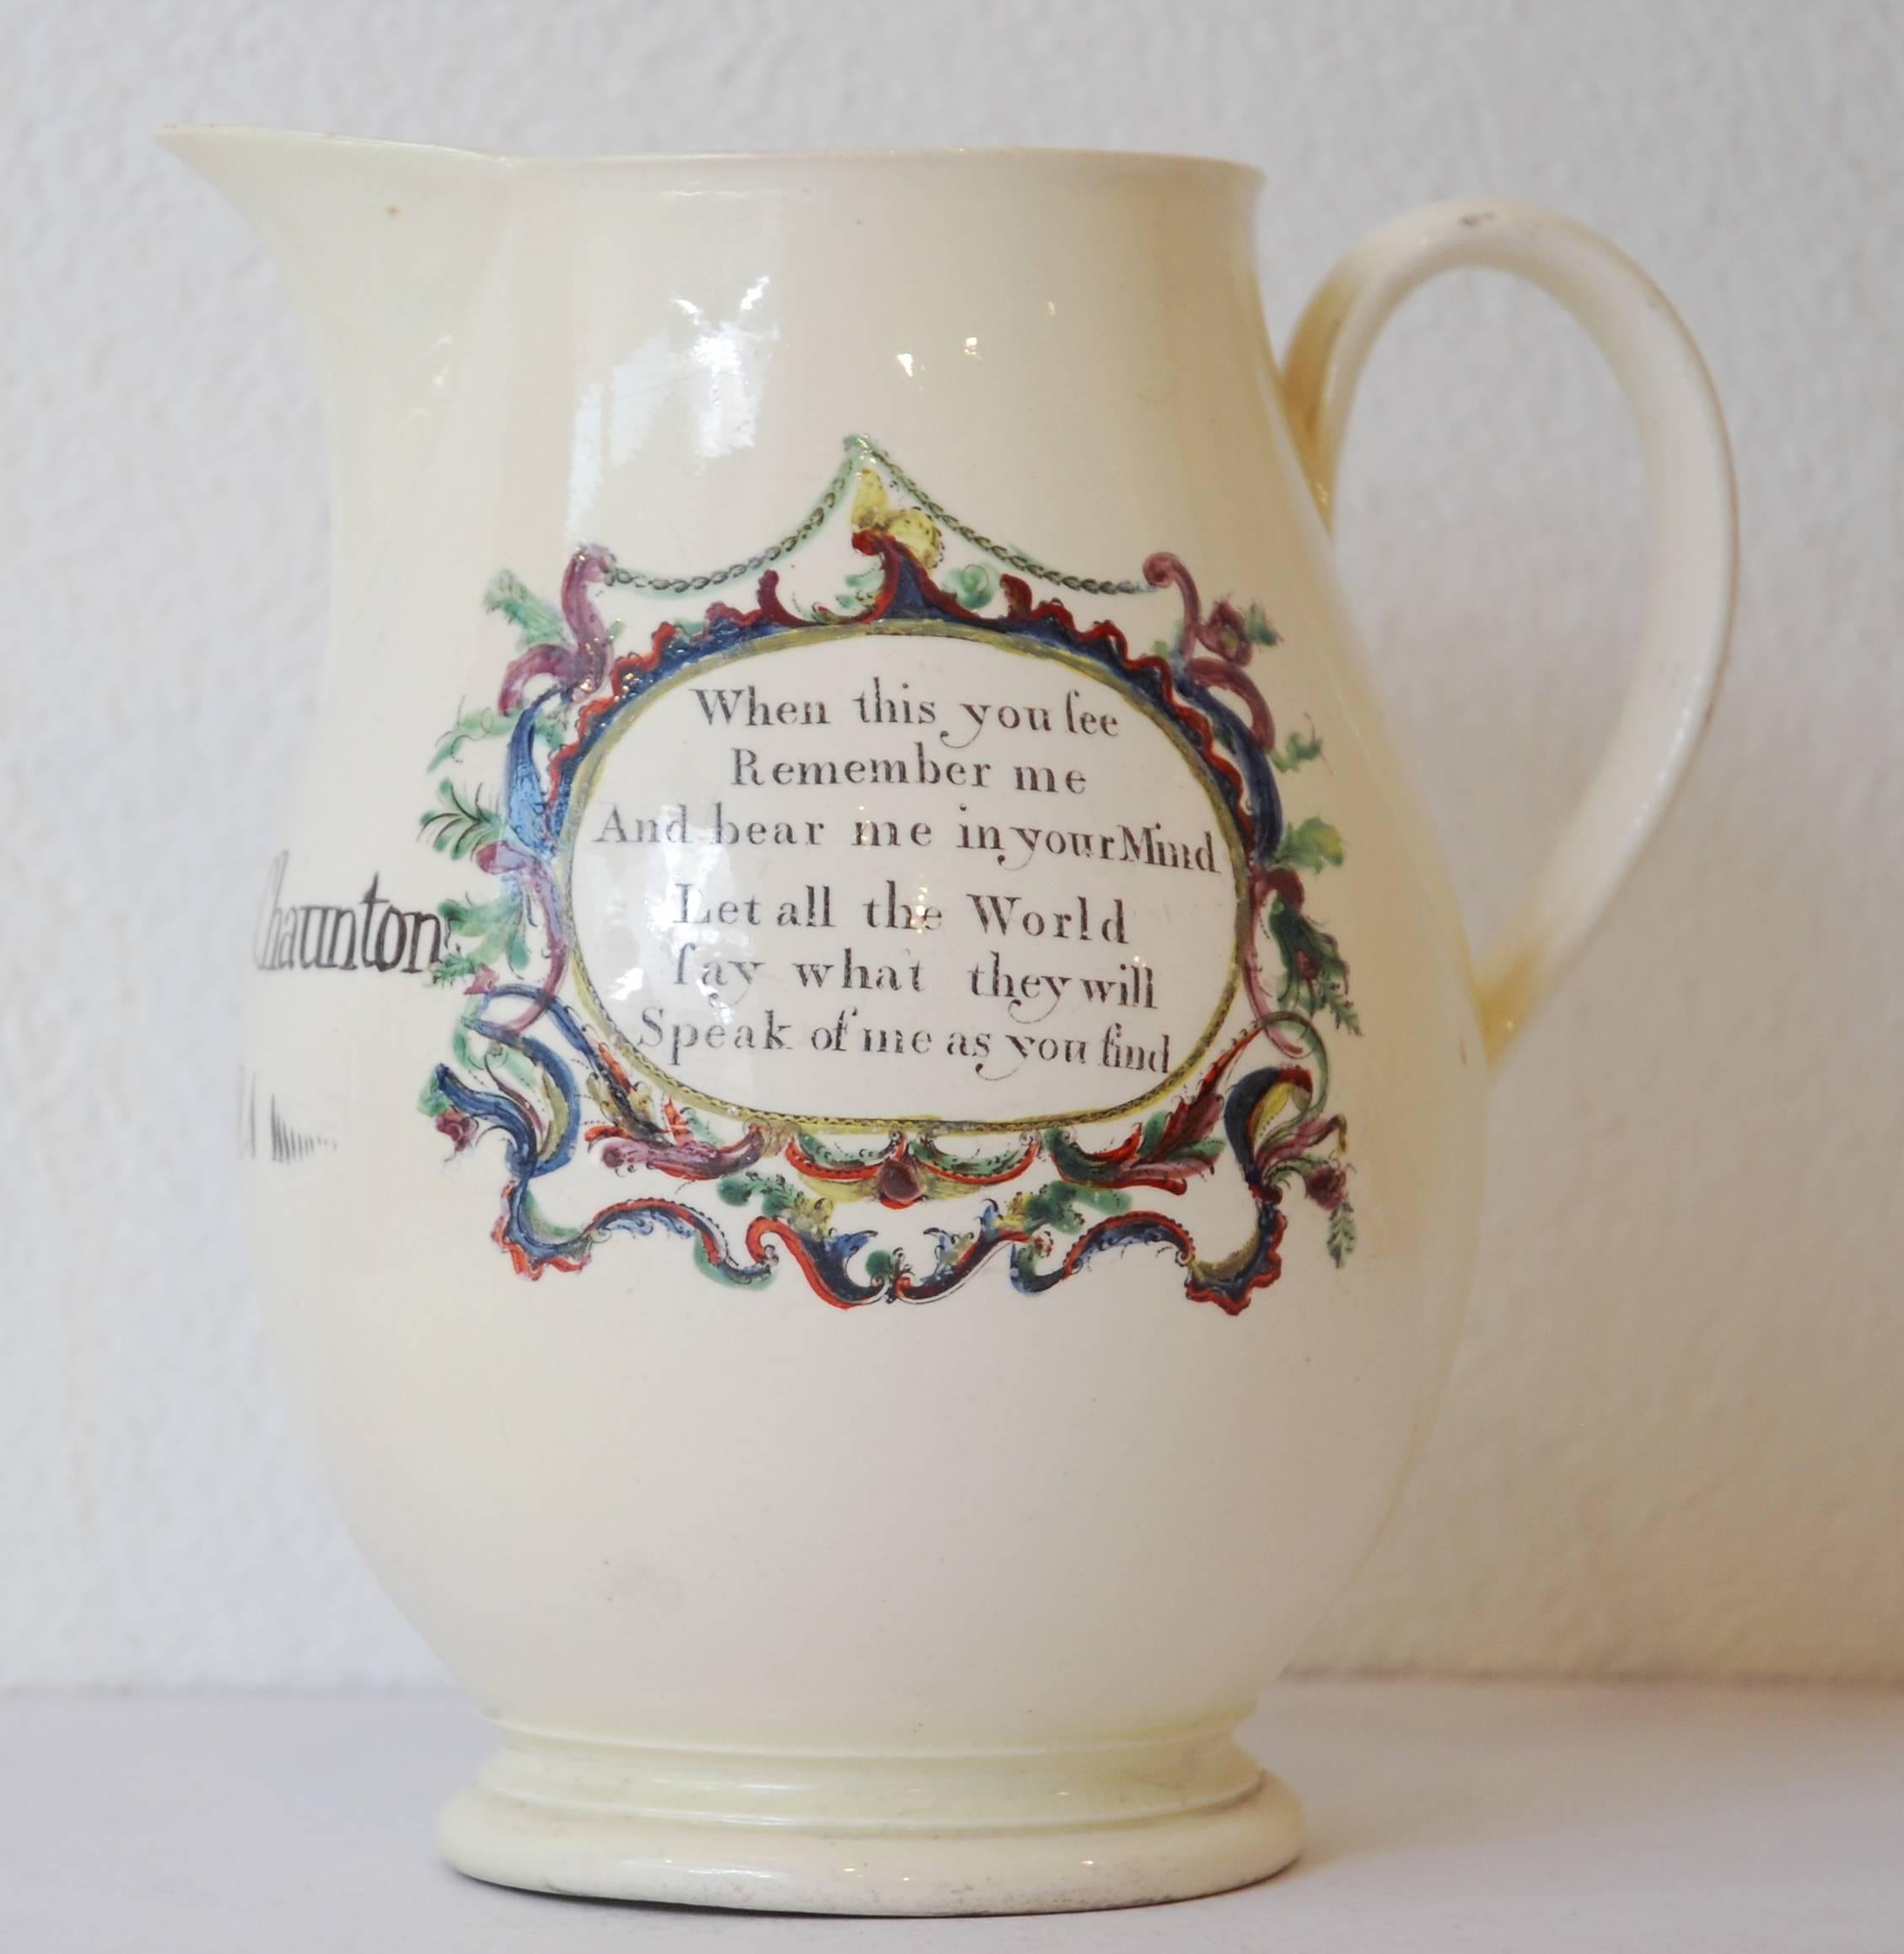 A documentary jug, decorated with transfer prints and enameling, dated and inscribed for Samuel Chaunton. Unmarked, but this class of dated creamware with enameled prints belongs to Leeds.

 